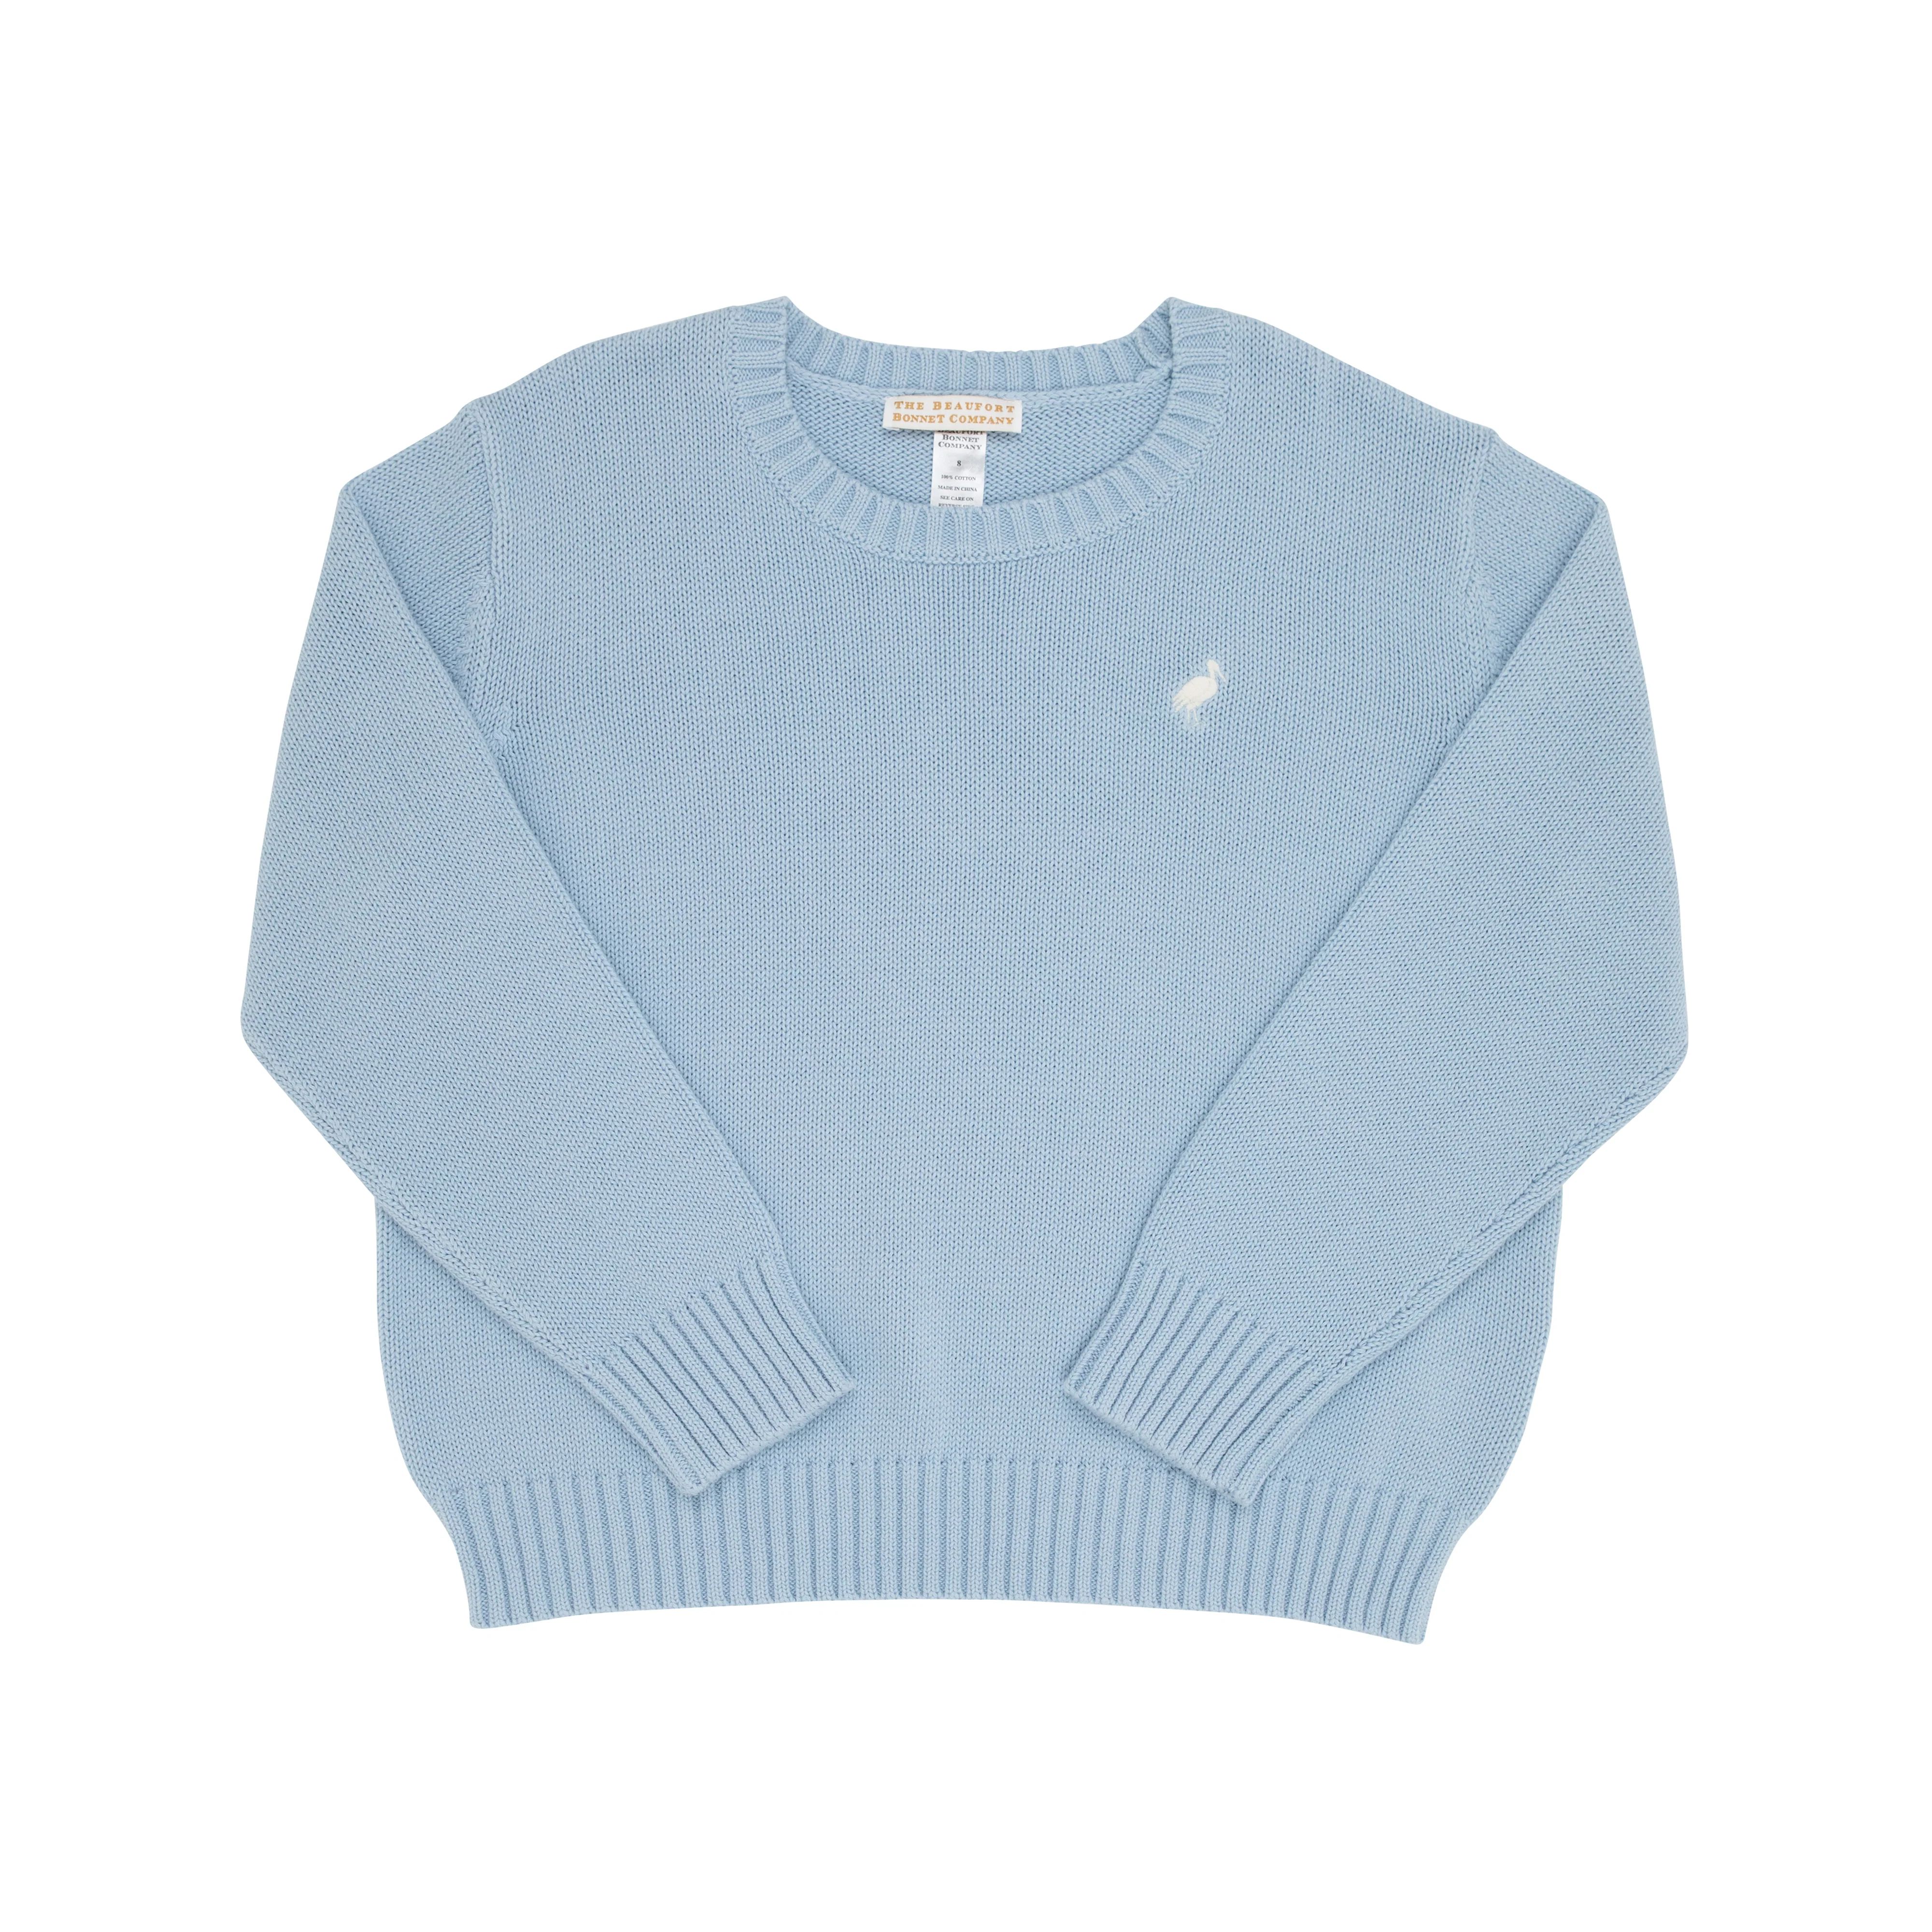 Isaac's Sweater (Unisex) - Barrington Blue with Palmetto Pearl Stork | The Beaufort Bonnet Company